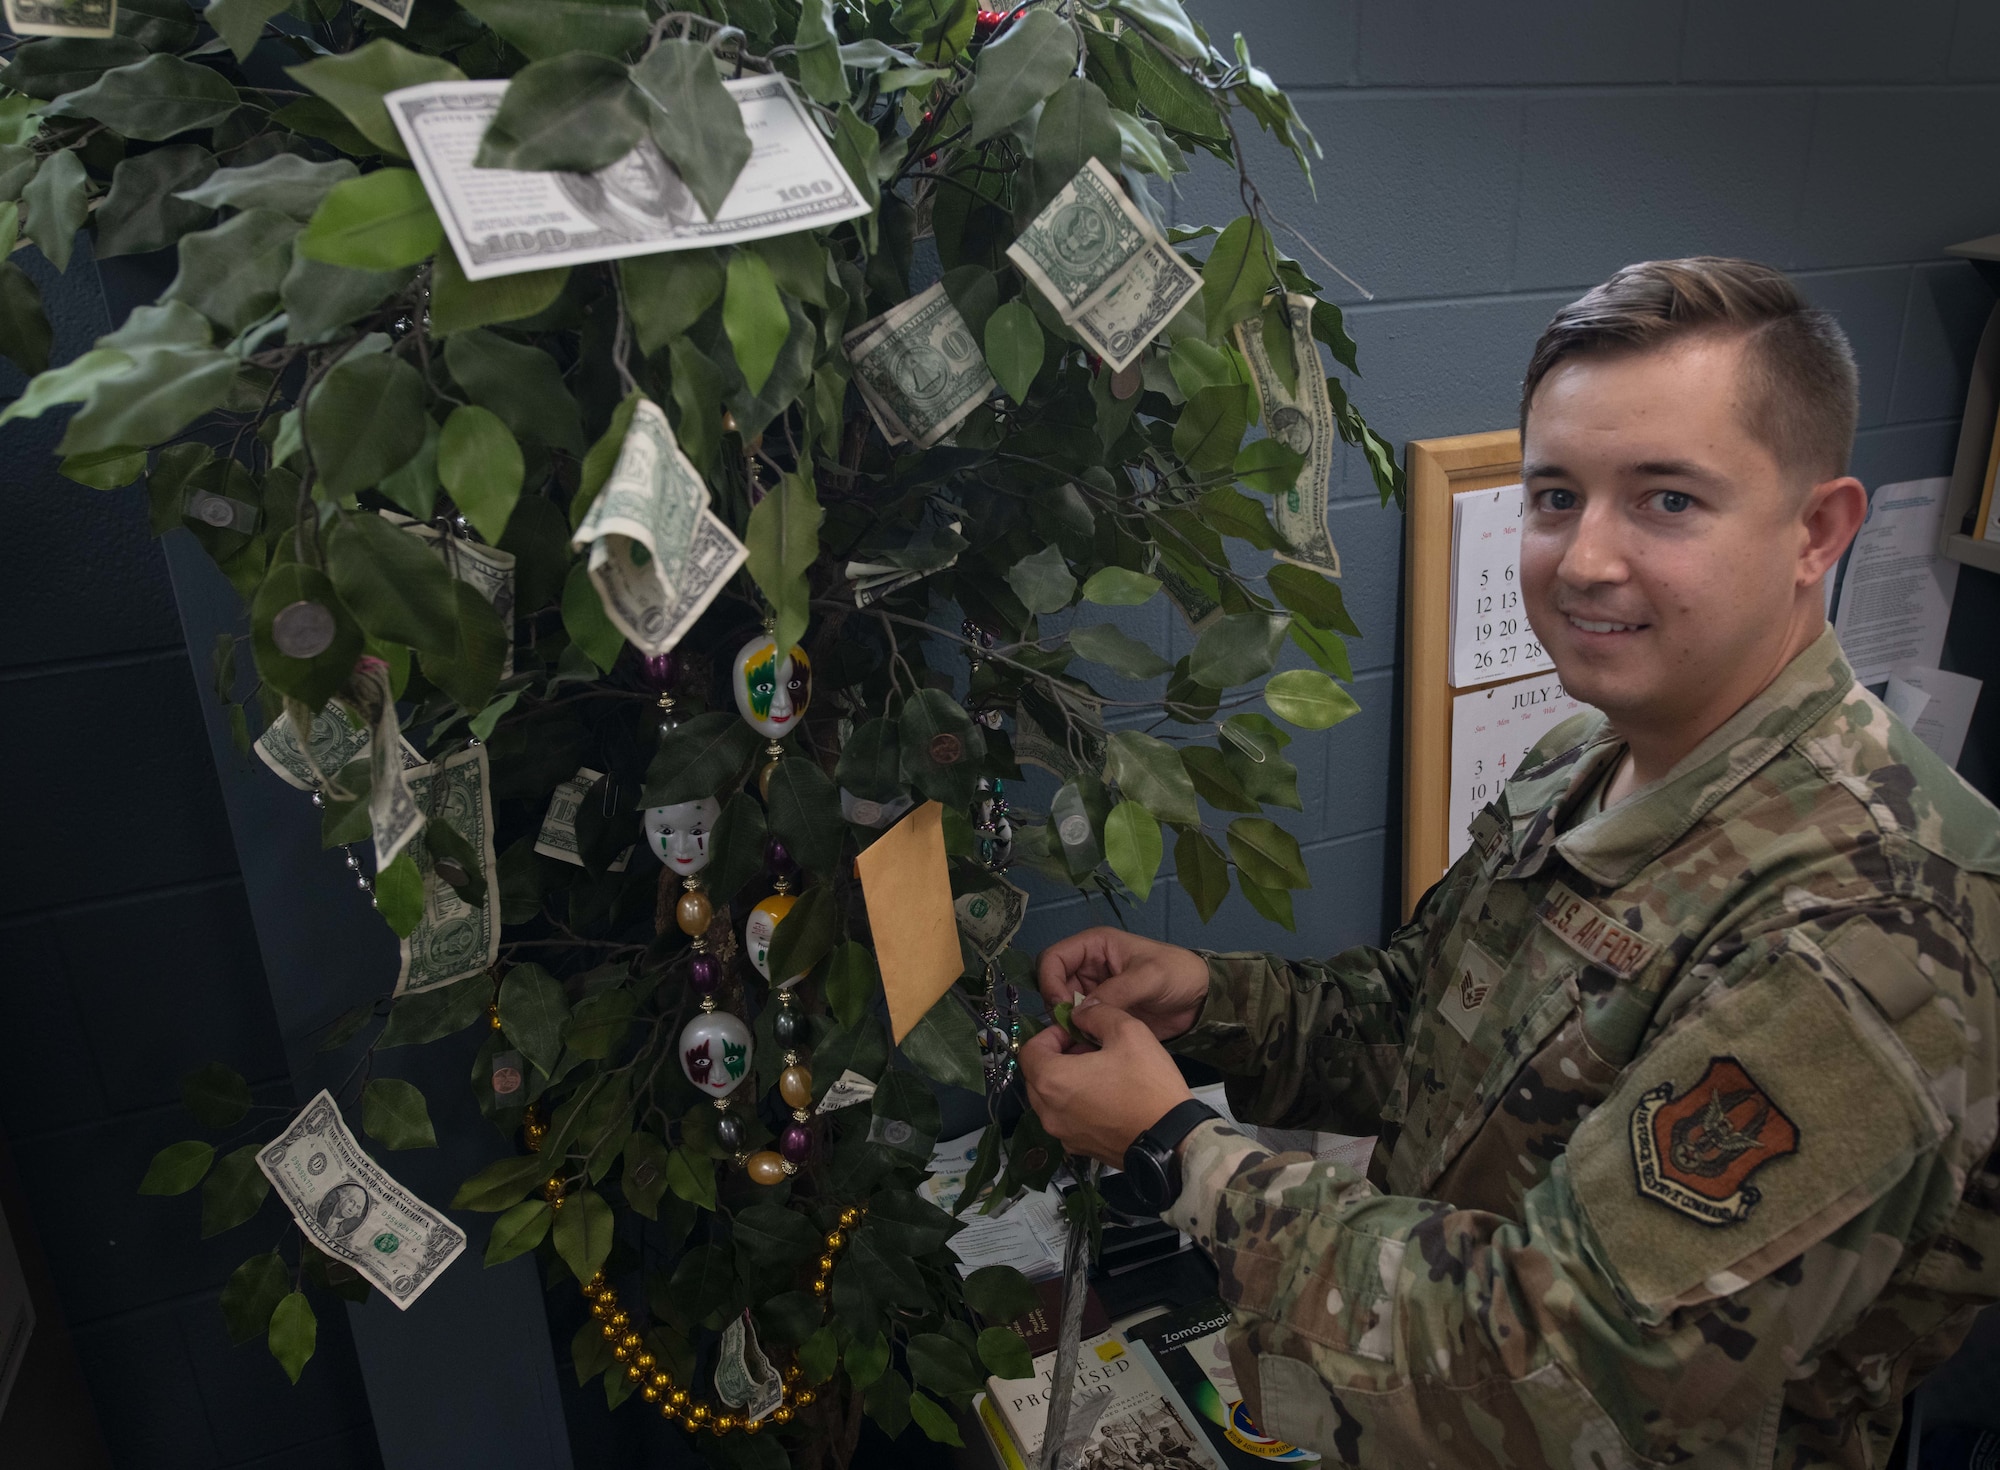 An Airman attaches a dollar to an artificial tree, decorated with dollar bills inside an office.